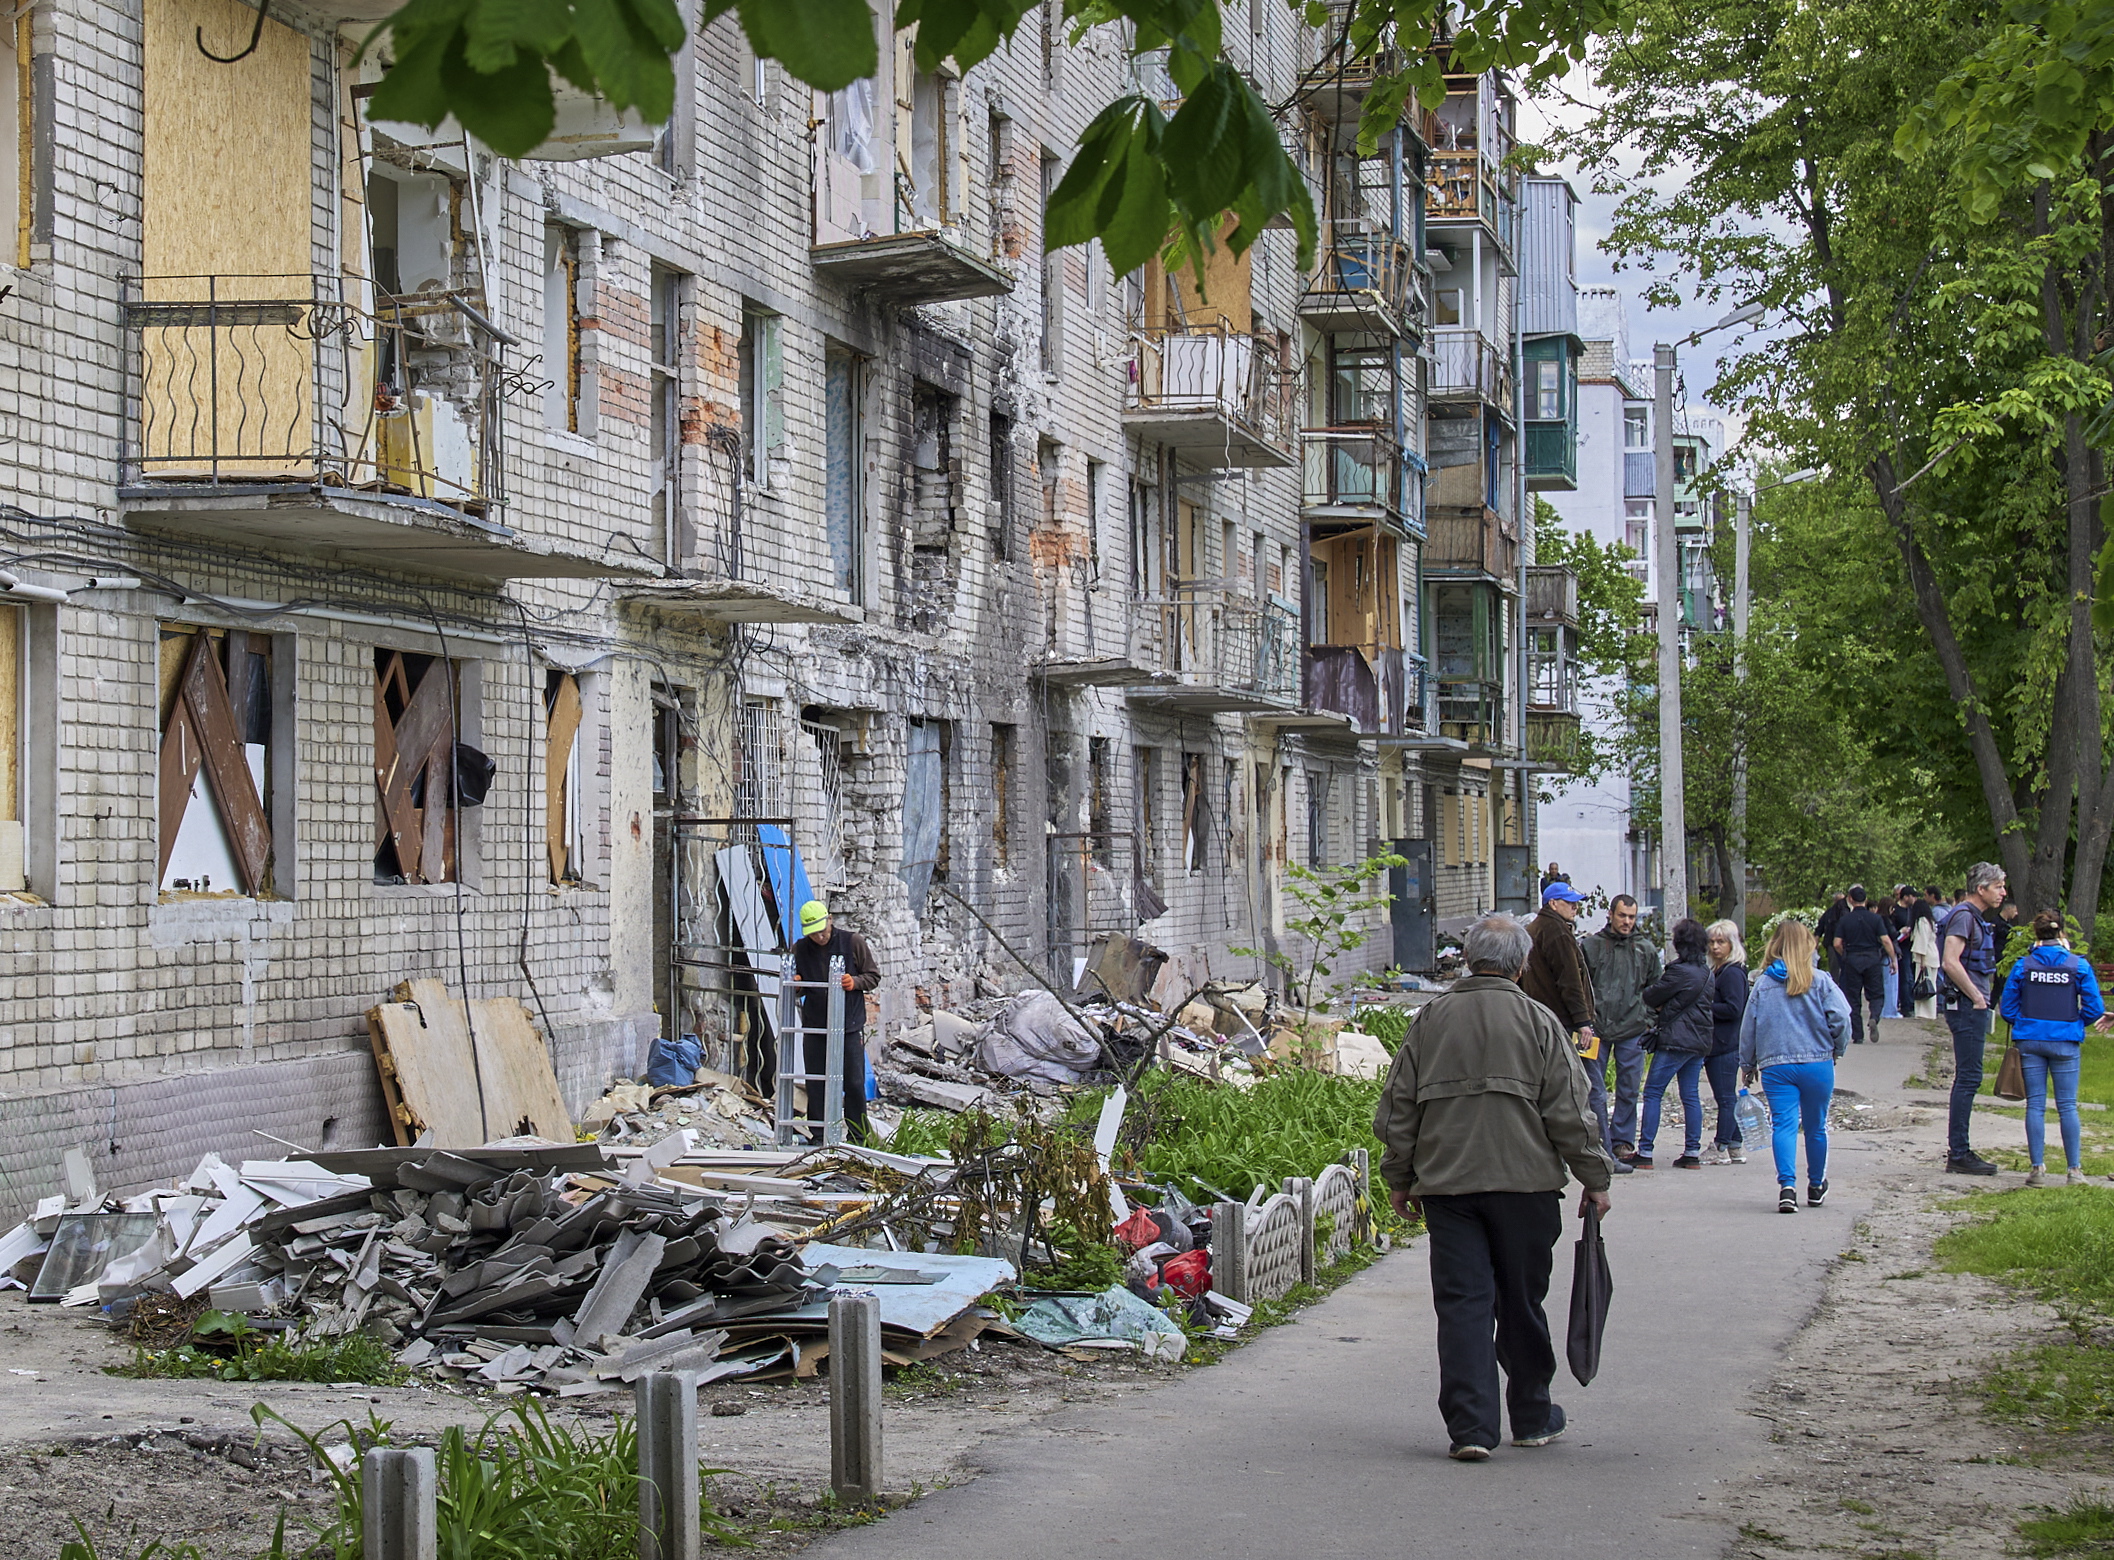 epa09974733 Locals walk past a residential building that was damaged during shelling in the outskirts of Kharkiv, Ukraine, 25 May 2022. Ukraine's second-largest city Kharkiv and its surroundings witnessed repeated airstrikes from Russian forces. On 24 February, Russian troops invaded Ukrainian territory starting a conflict that has provoked destruction and a humanitarian crisis. According to the UNHCR, more than 6.5 million refugees have fled Ukraine, and a further 7.7 million people have been displaced internally within Ukraine since.  EPA/SERGEY KOZLOV